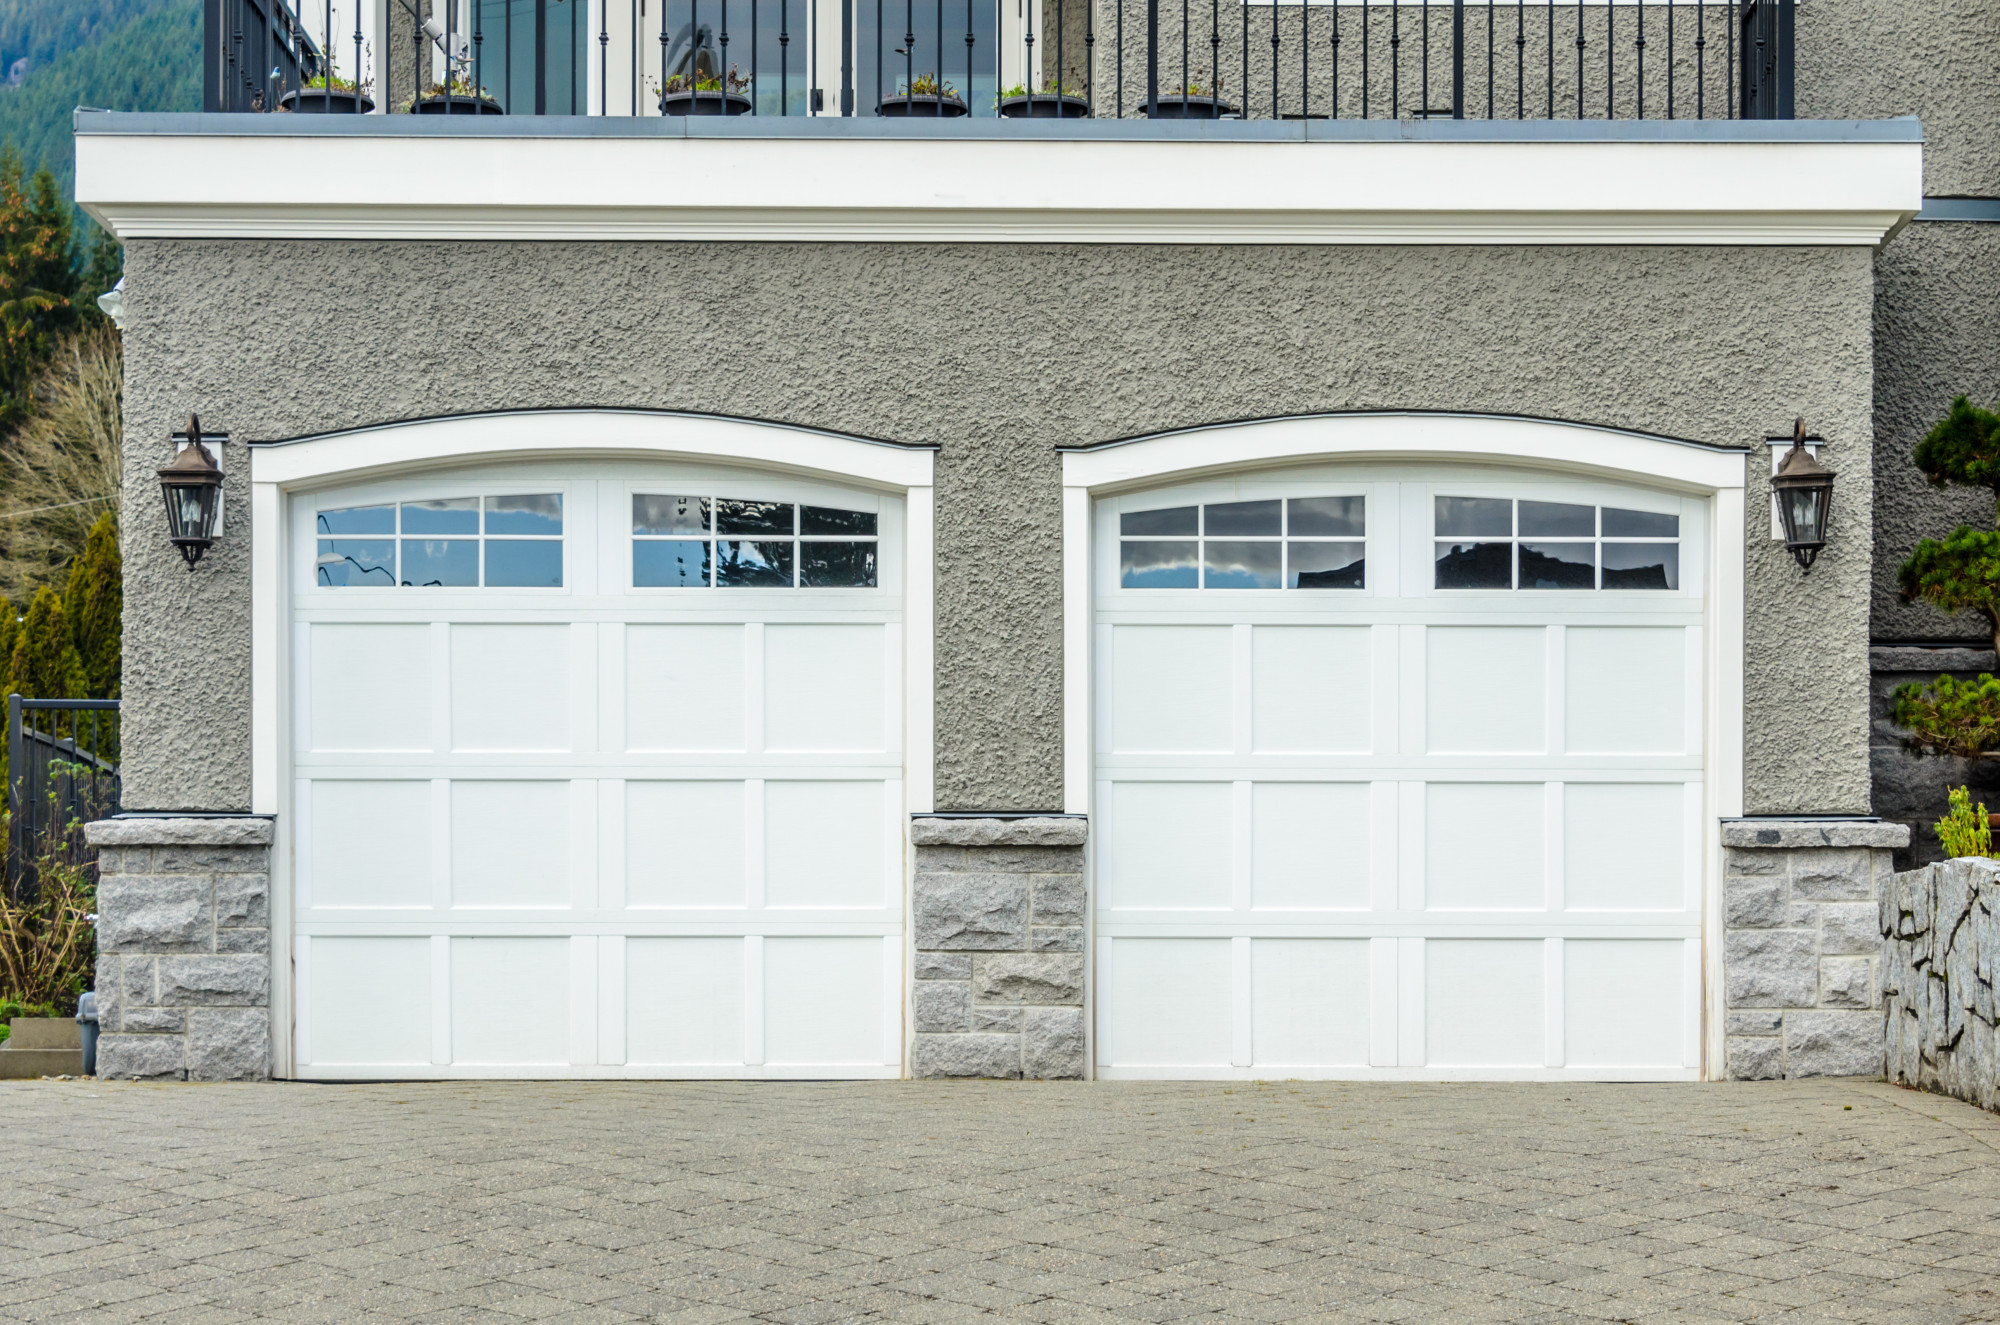 Replacing an old or damage garage door properly requires knowing what not to do. Here are garage door replacement mistakes and how to avoid them.